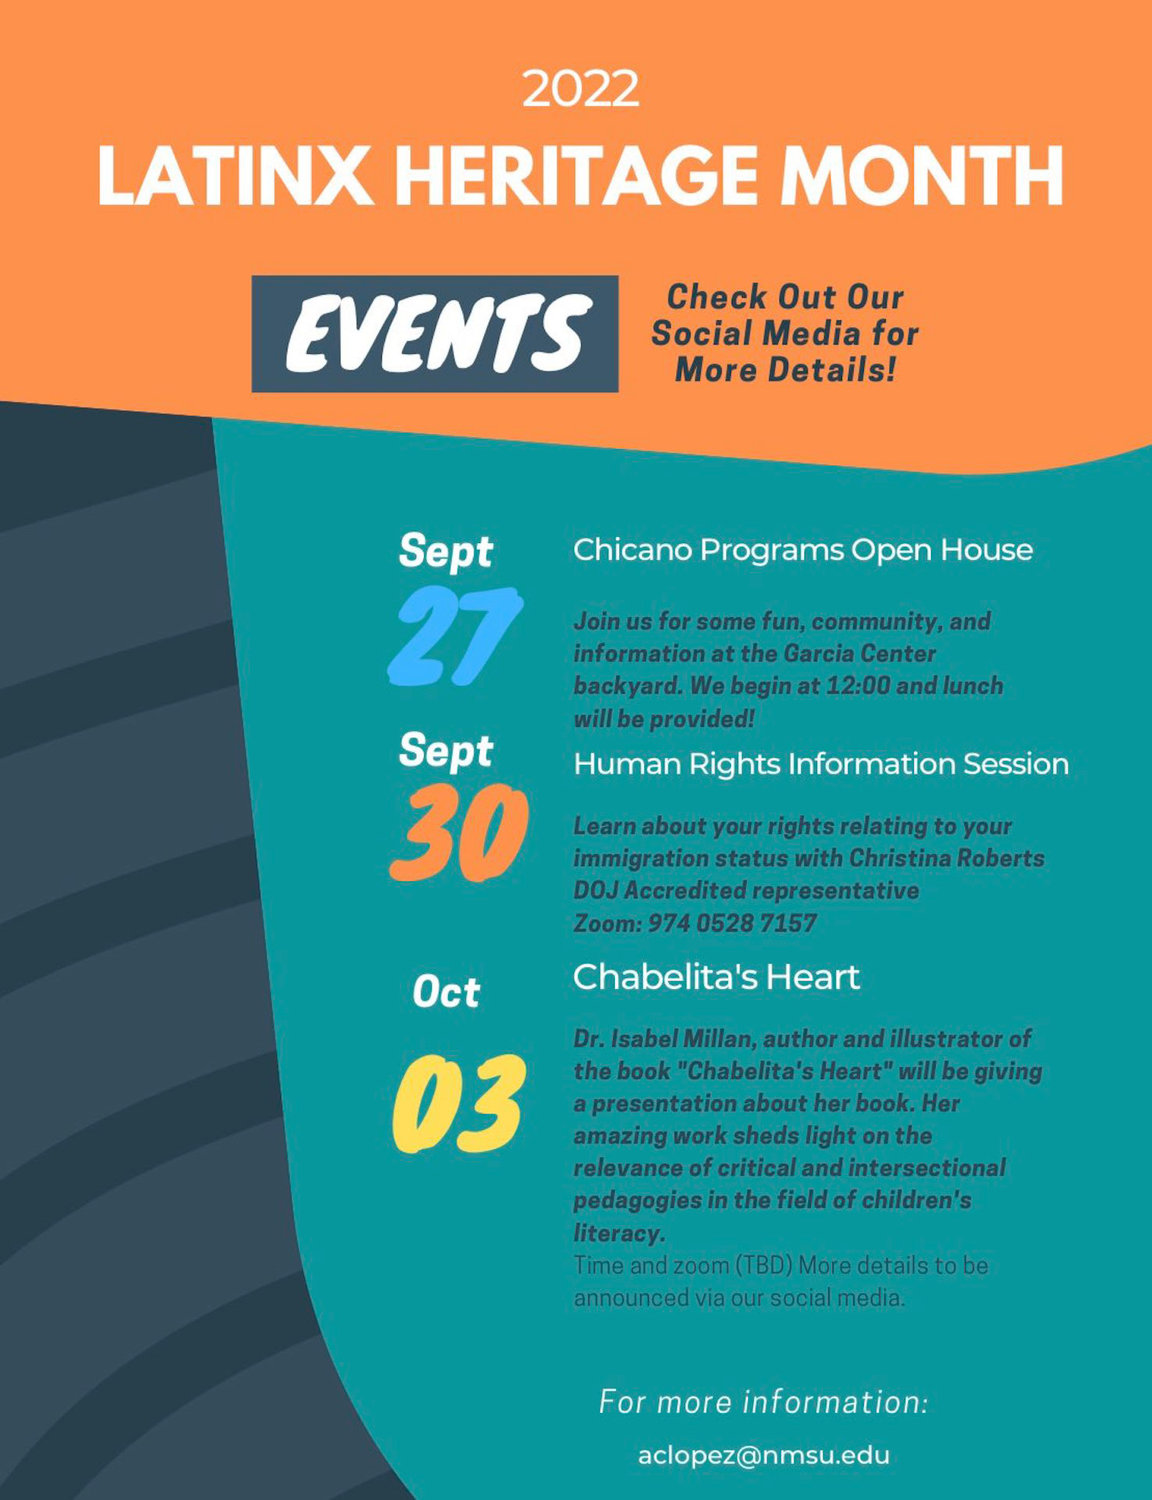 Chicanx/Latinx Annual Events